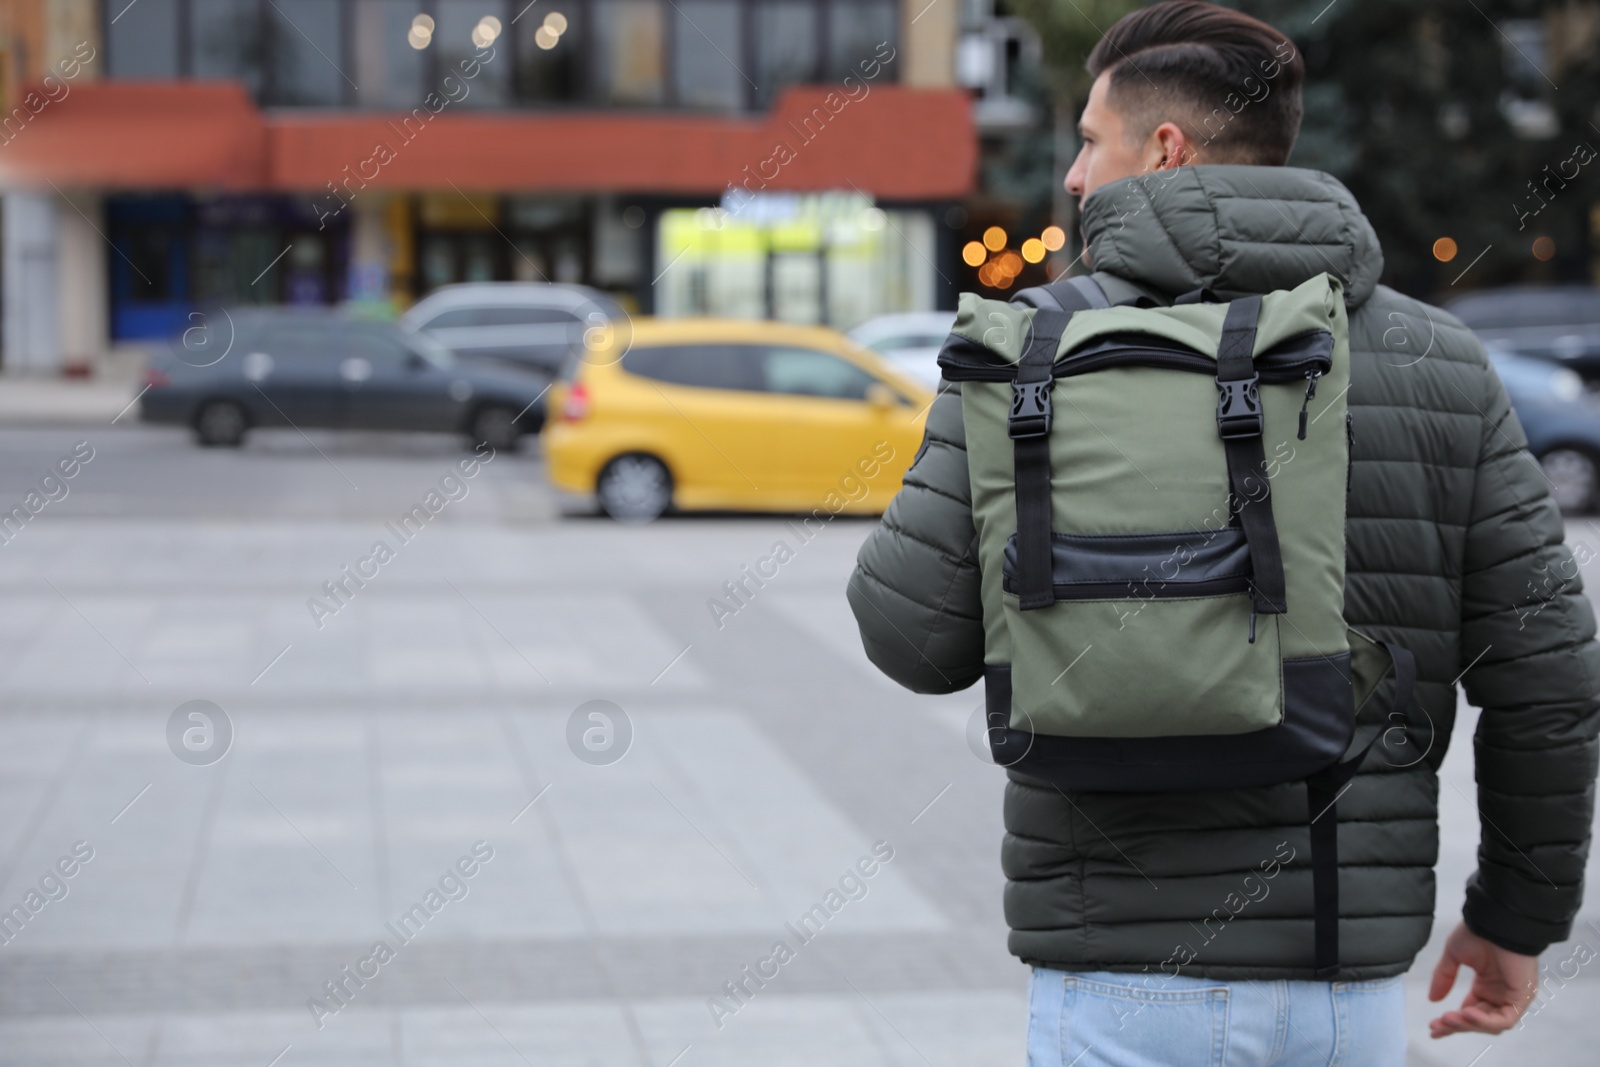 Photo of Male tourist with travel backpack on city street, back view. Urban trip